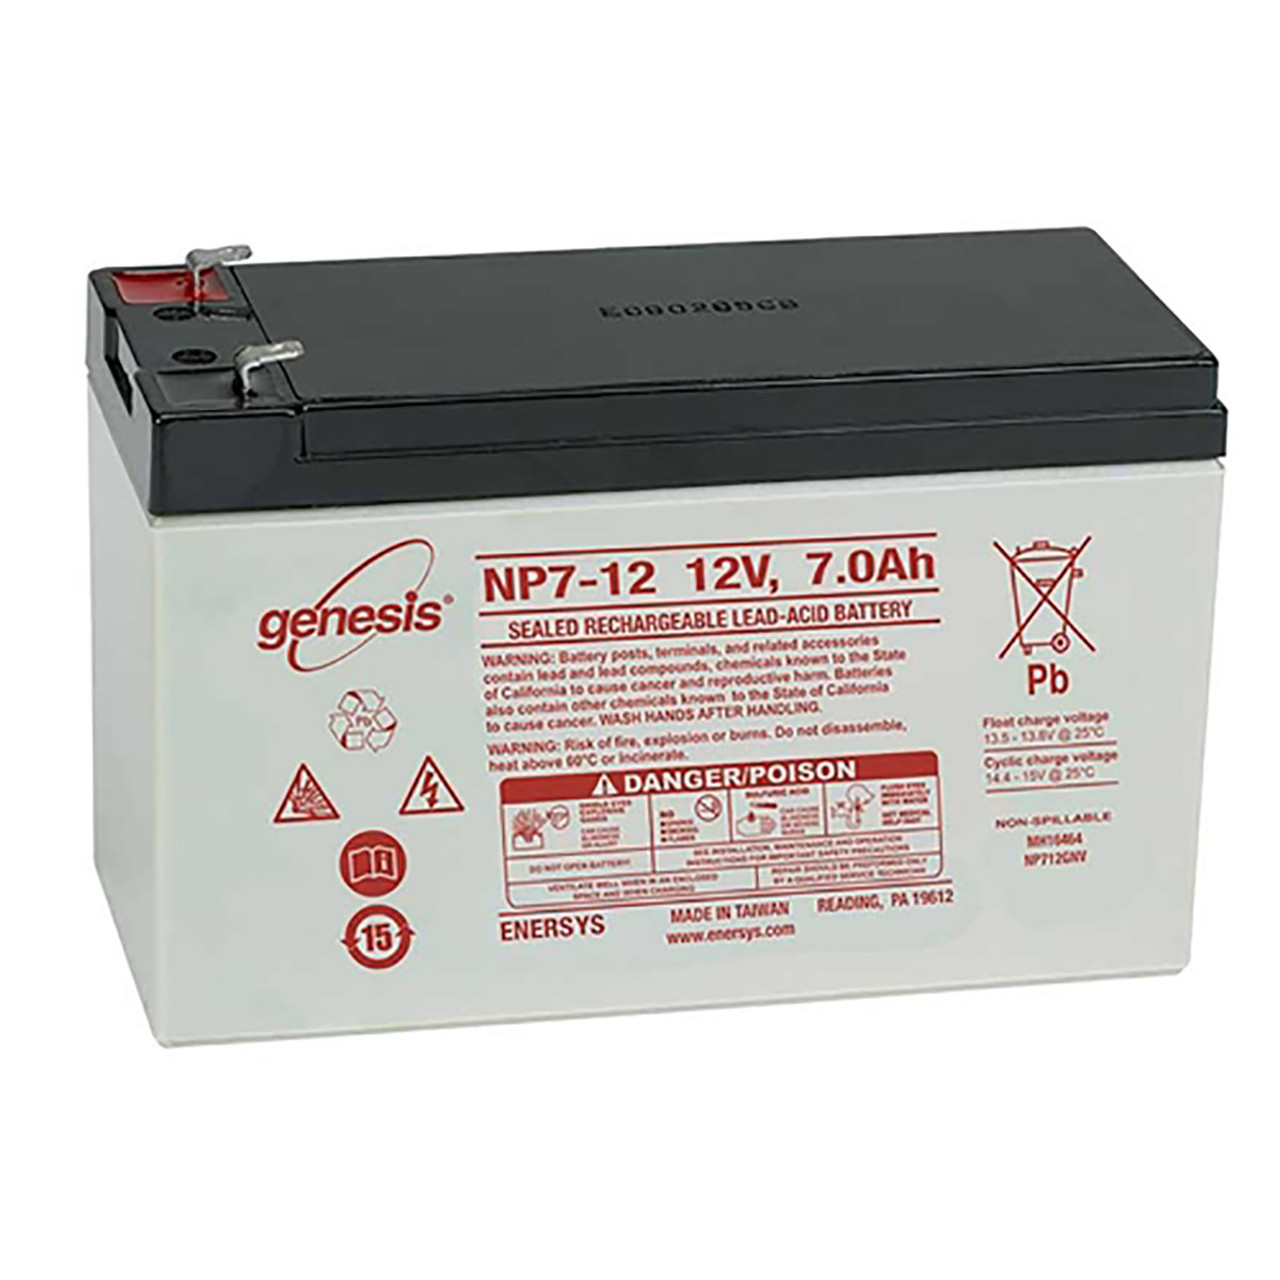 Astro Med Z-1000 Graphic Recorder Battery Aftermarket